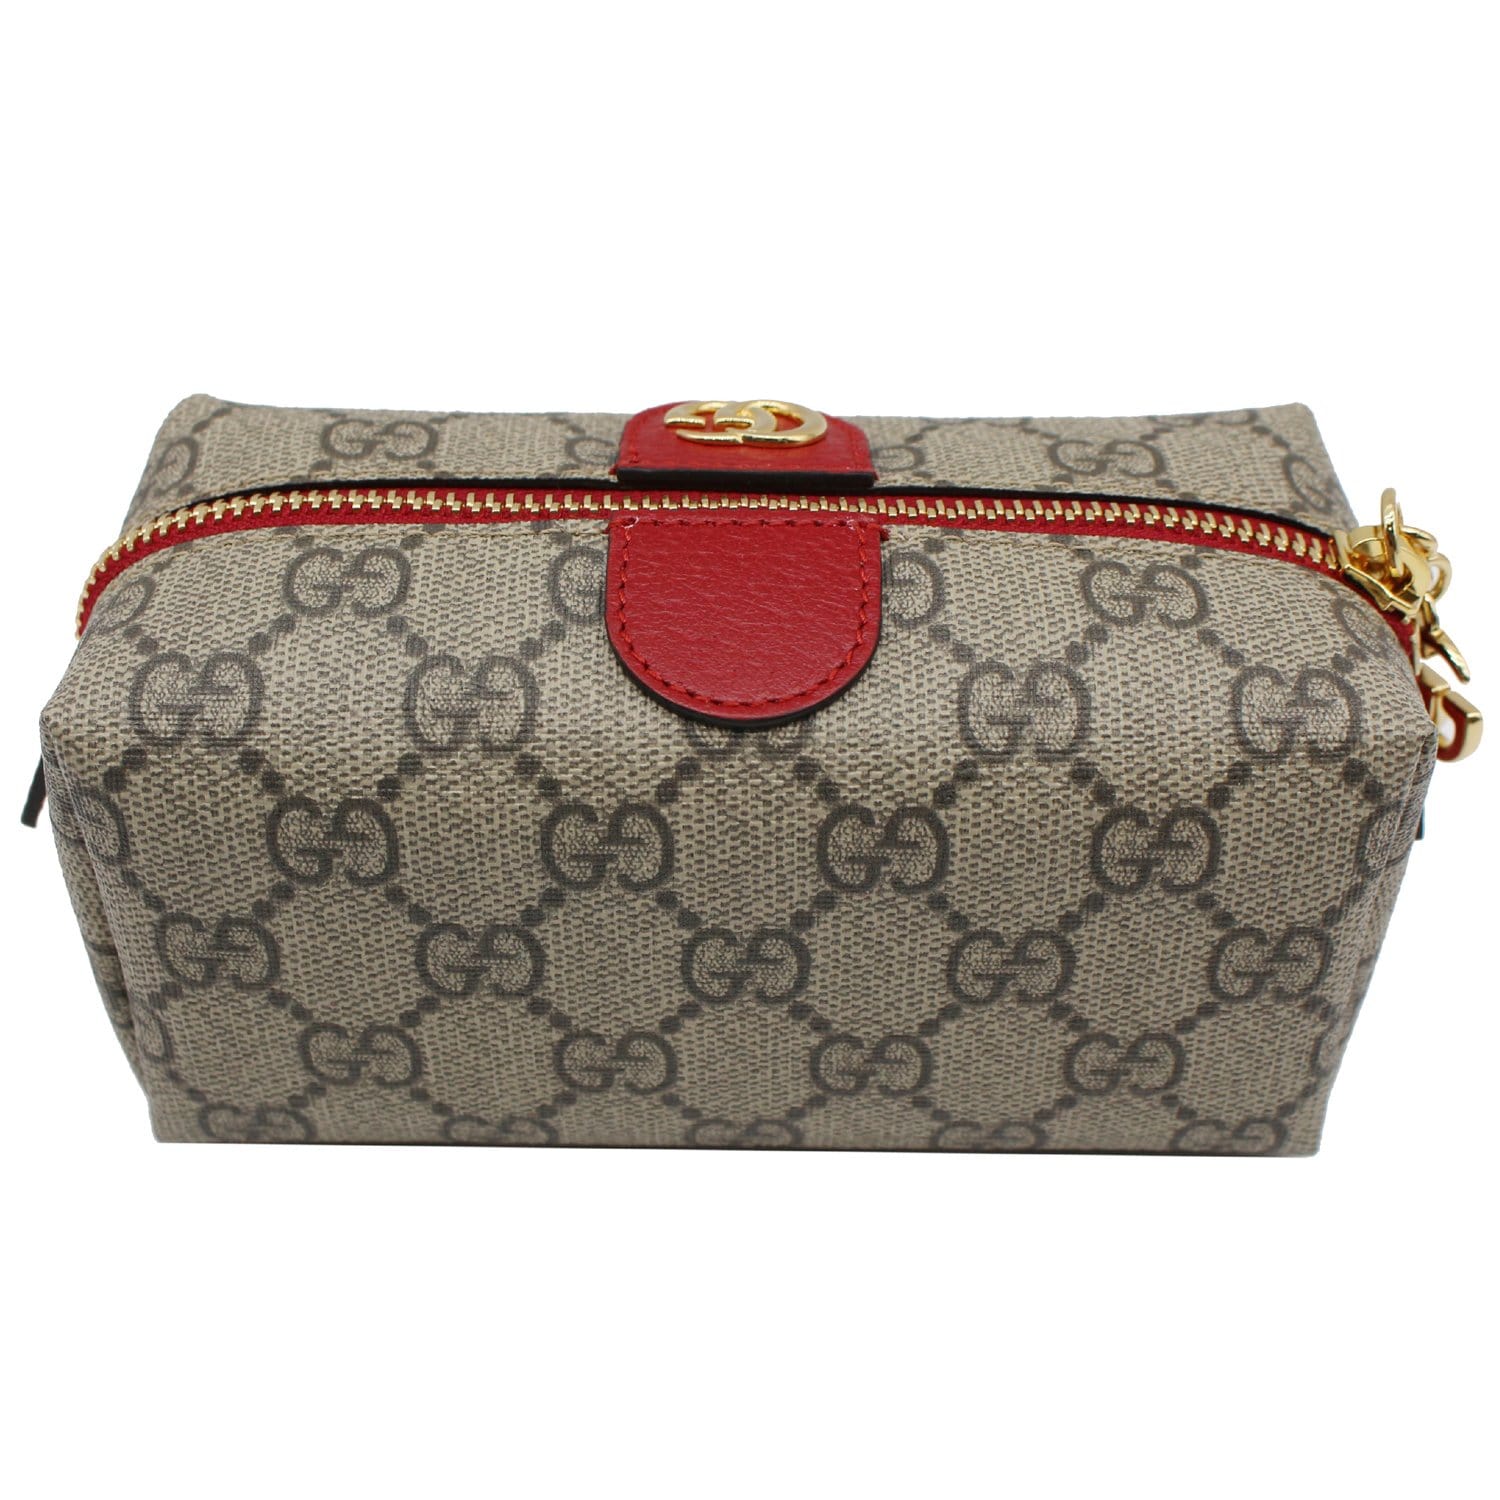 GG Canvas Toiletry Bag in Grey - Gucci